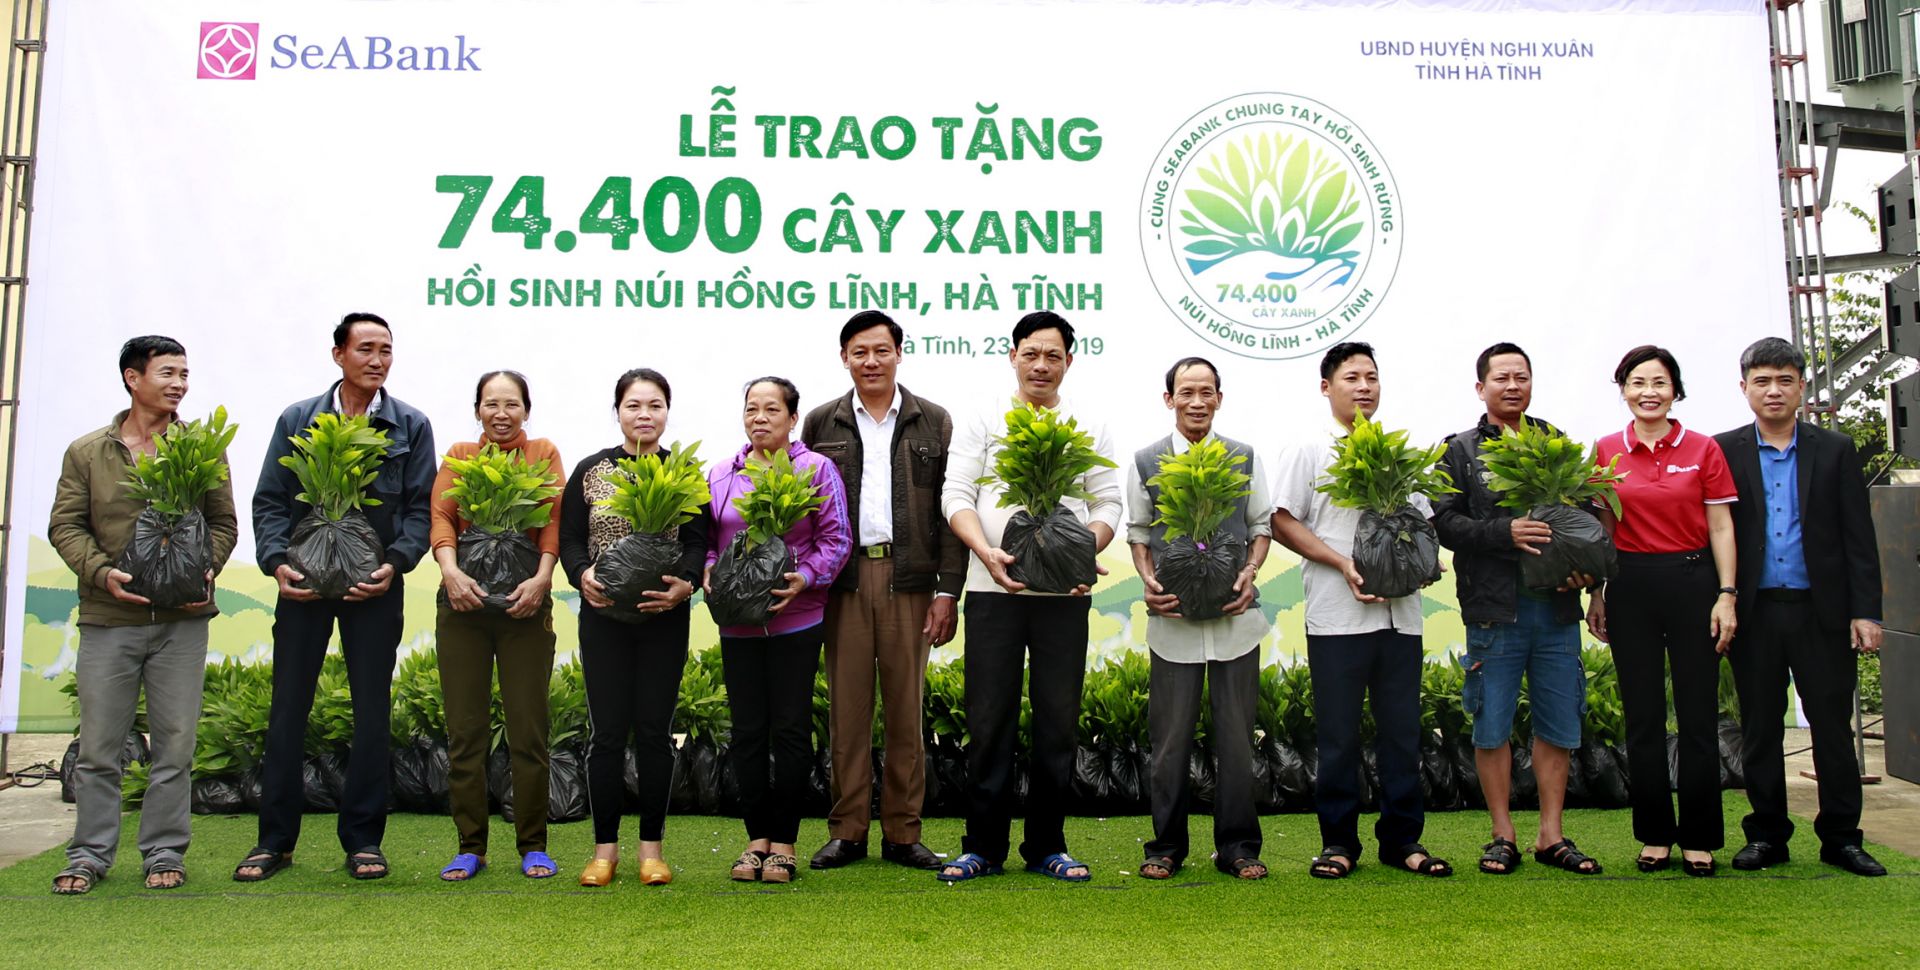 seabank gifted 74400 trees to help revitalize hong linh mountain ha tinh province